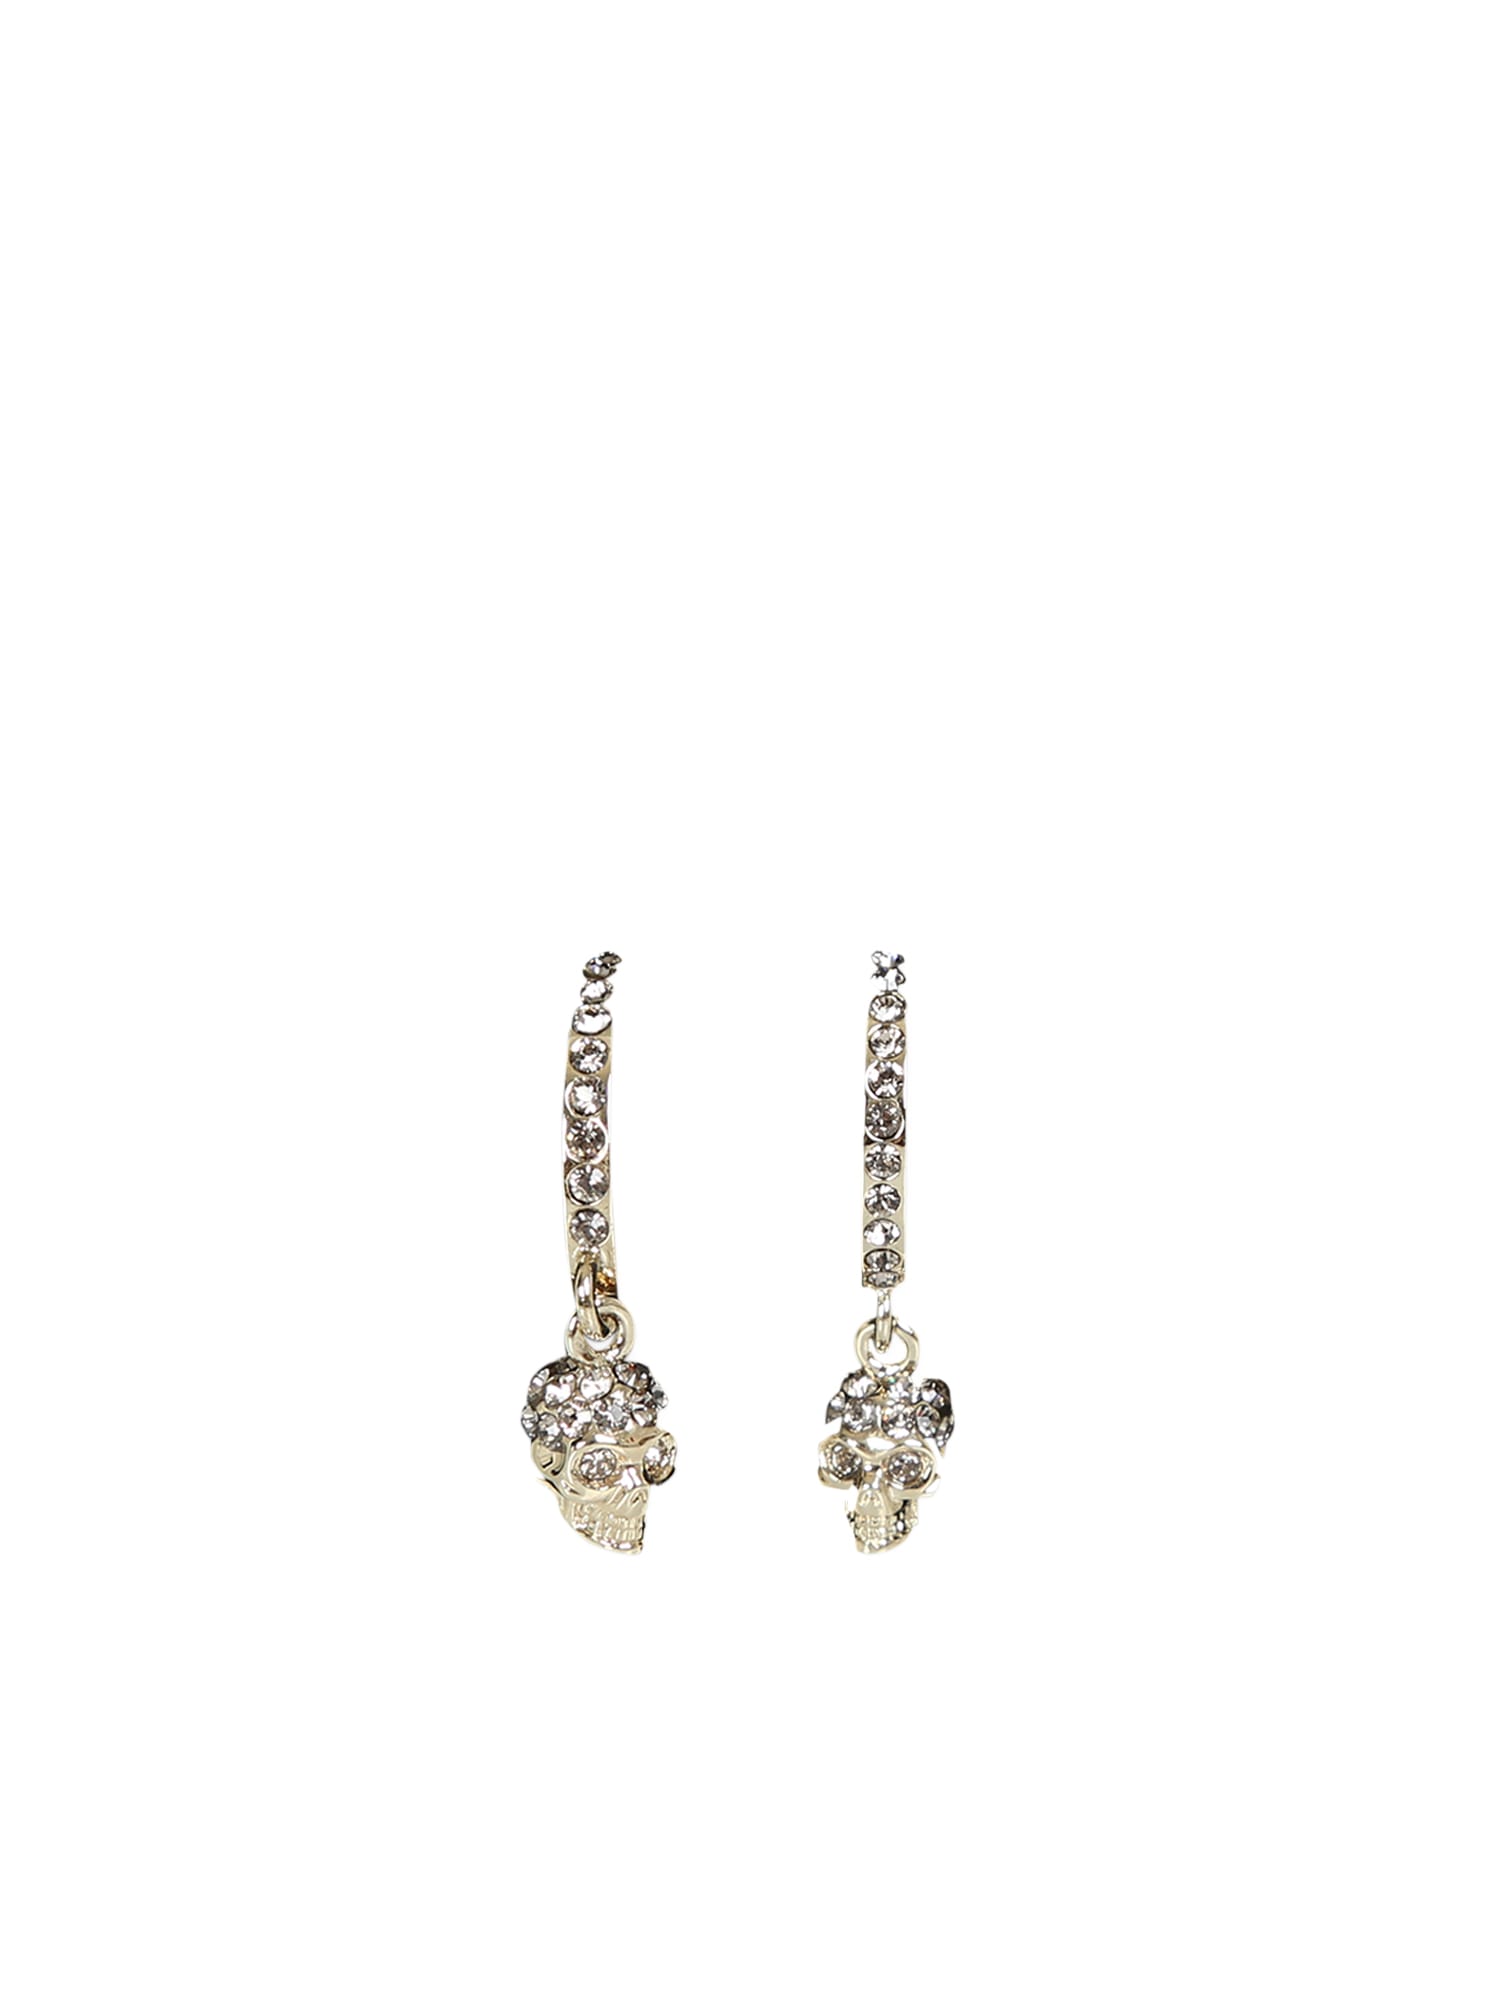 alexander mcqueen gold finish hoop earrings embellished with swarovski crystals